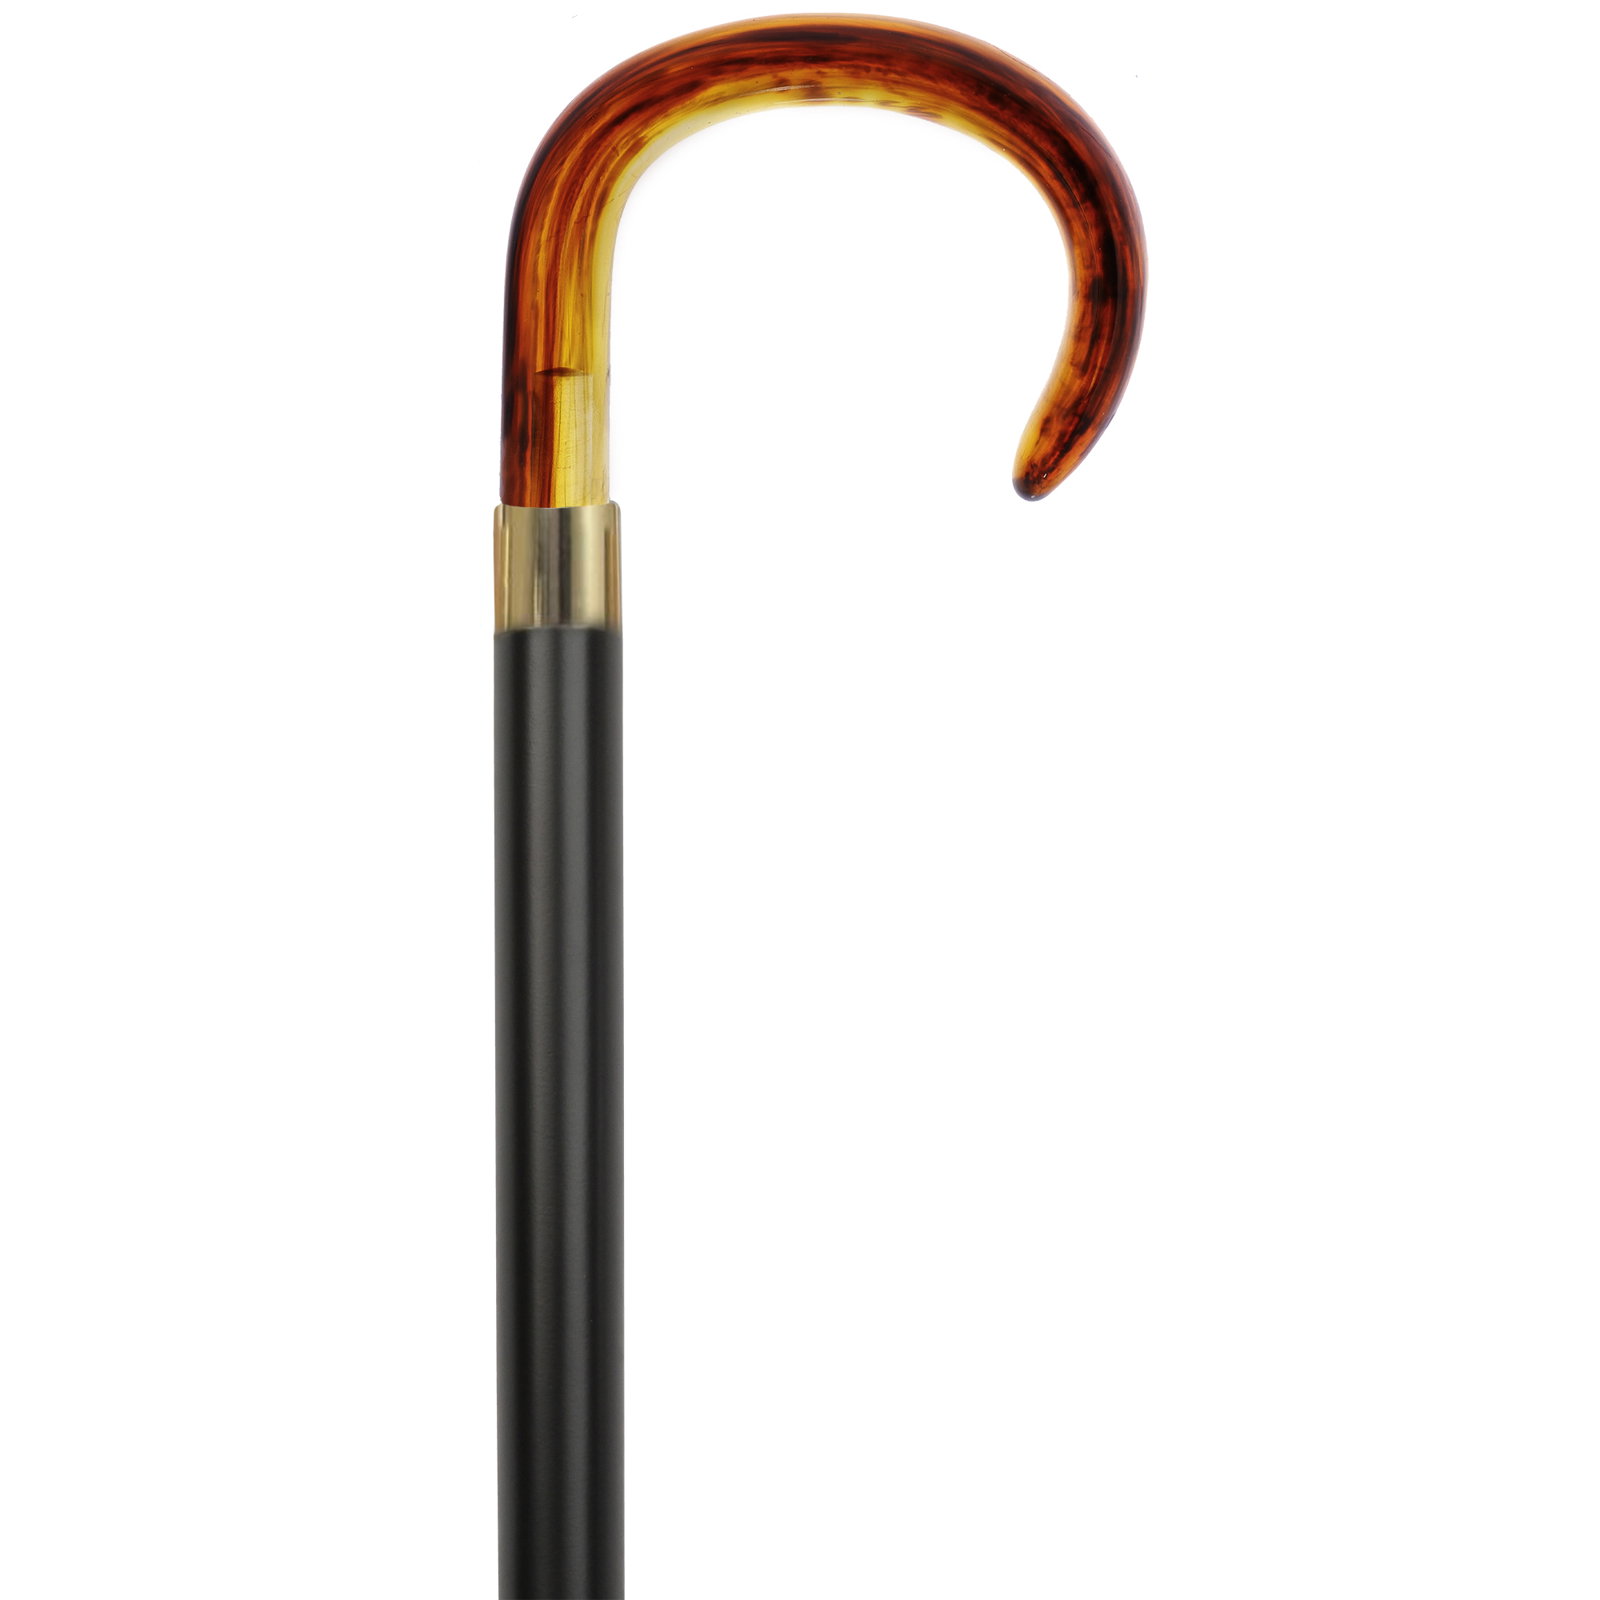 Brass Fritz Style Handle Walking Cane with Brown Beechwood Shaft